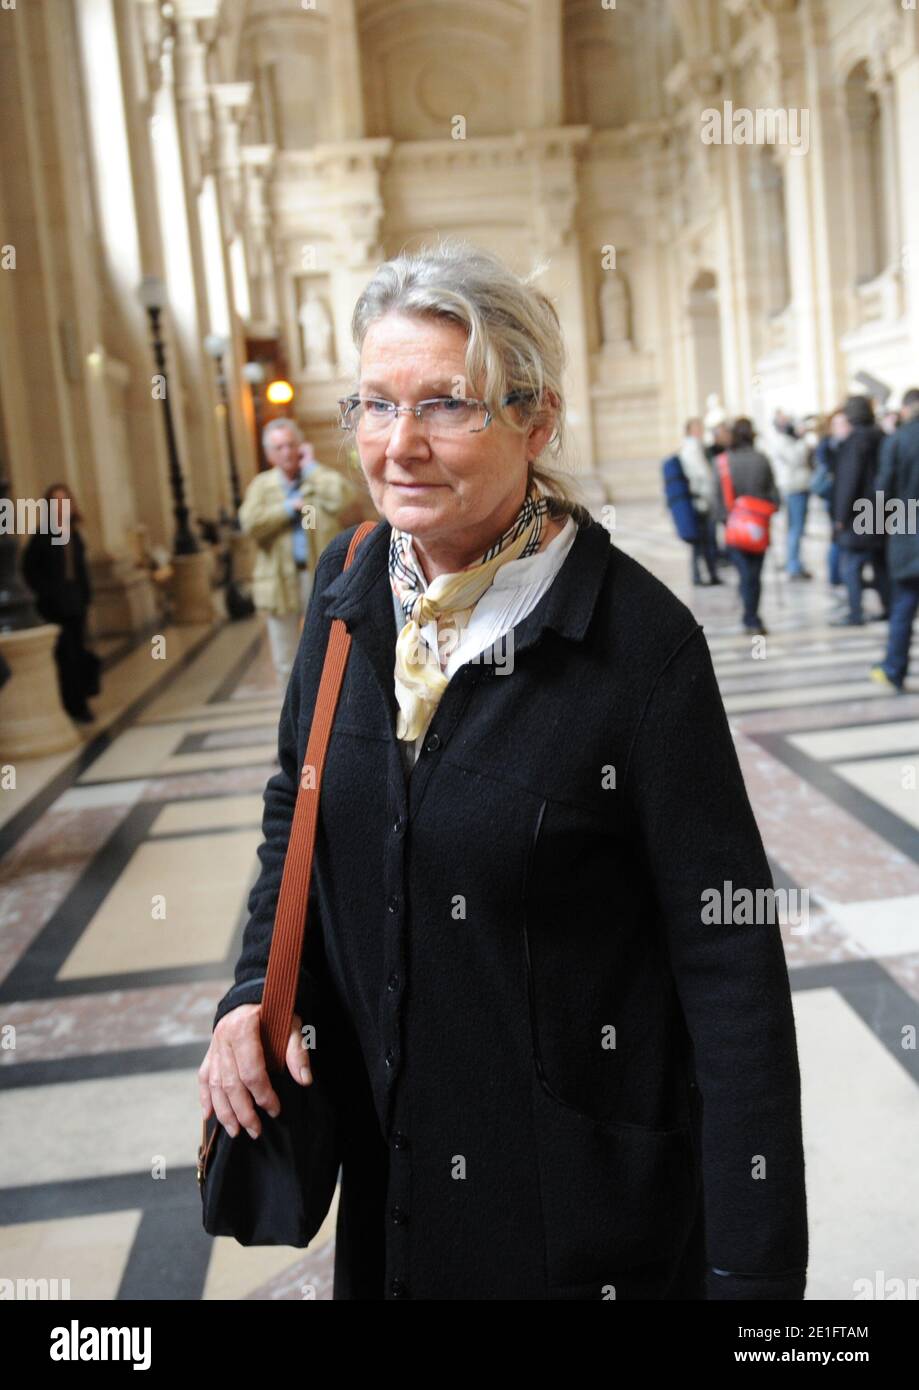 Danielle Gonnin, the mother of Kalinka Bamberski pictured at the Palais de Justice where she attended the second day of Krombach's trial for the murder of Kalinka Bamberski, in Paris, France on March 30, 2011. The French court today decided to continue the trial of the German doctor, who is accused of having raped and killed his then 14-year-old stepdaughter, Kalinka Bamberski, in the summer of 1982 while she was holidaying with her mother at Krombach's home at Lake Constance, southern Germany. A court in Germany ruled that Krombach could not be held responsible for the death, but in 1995 a co Stock Photo